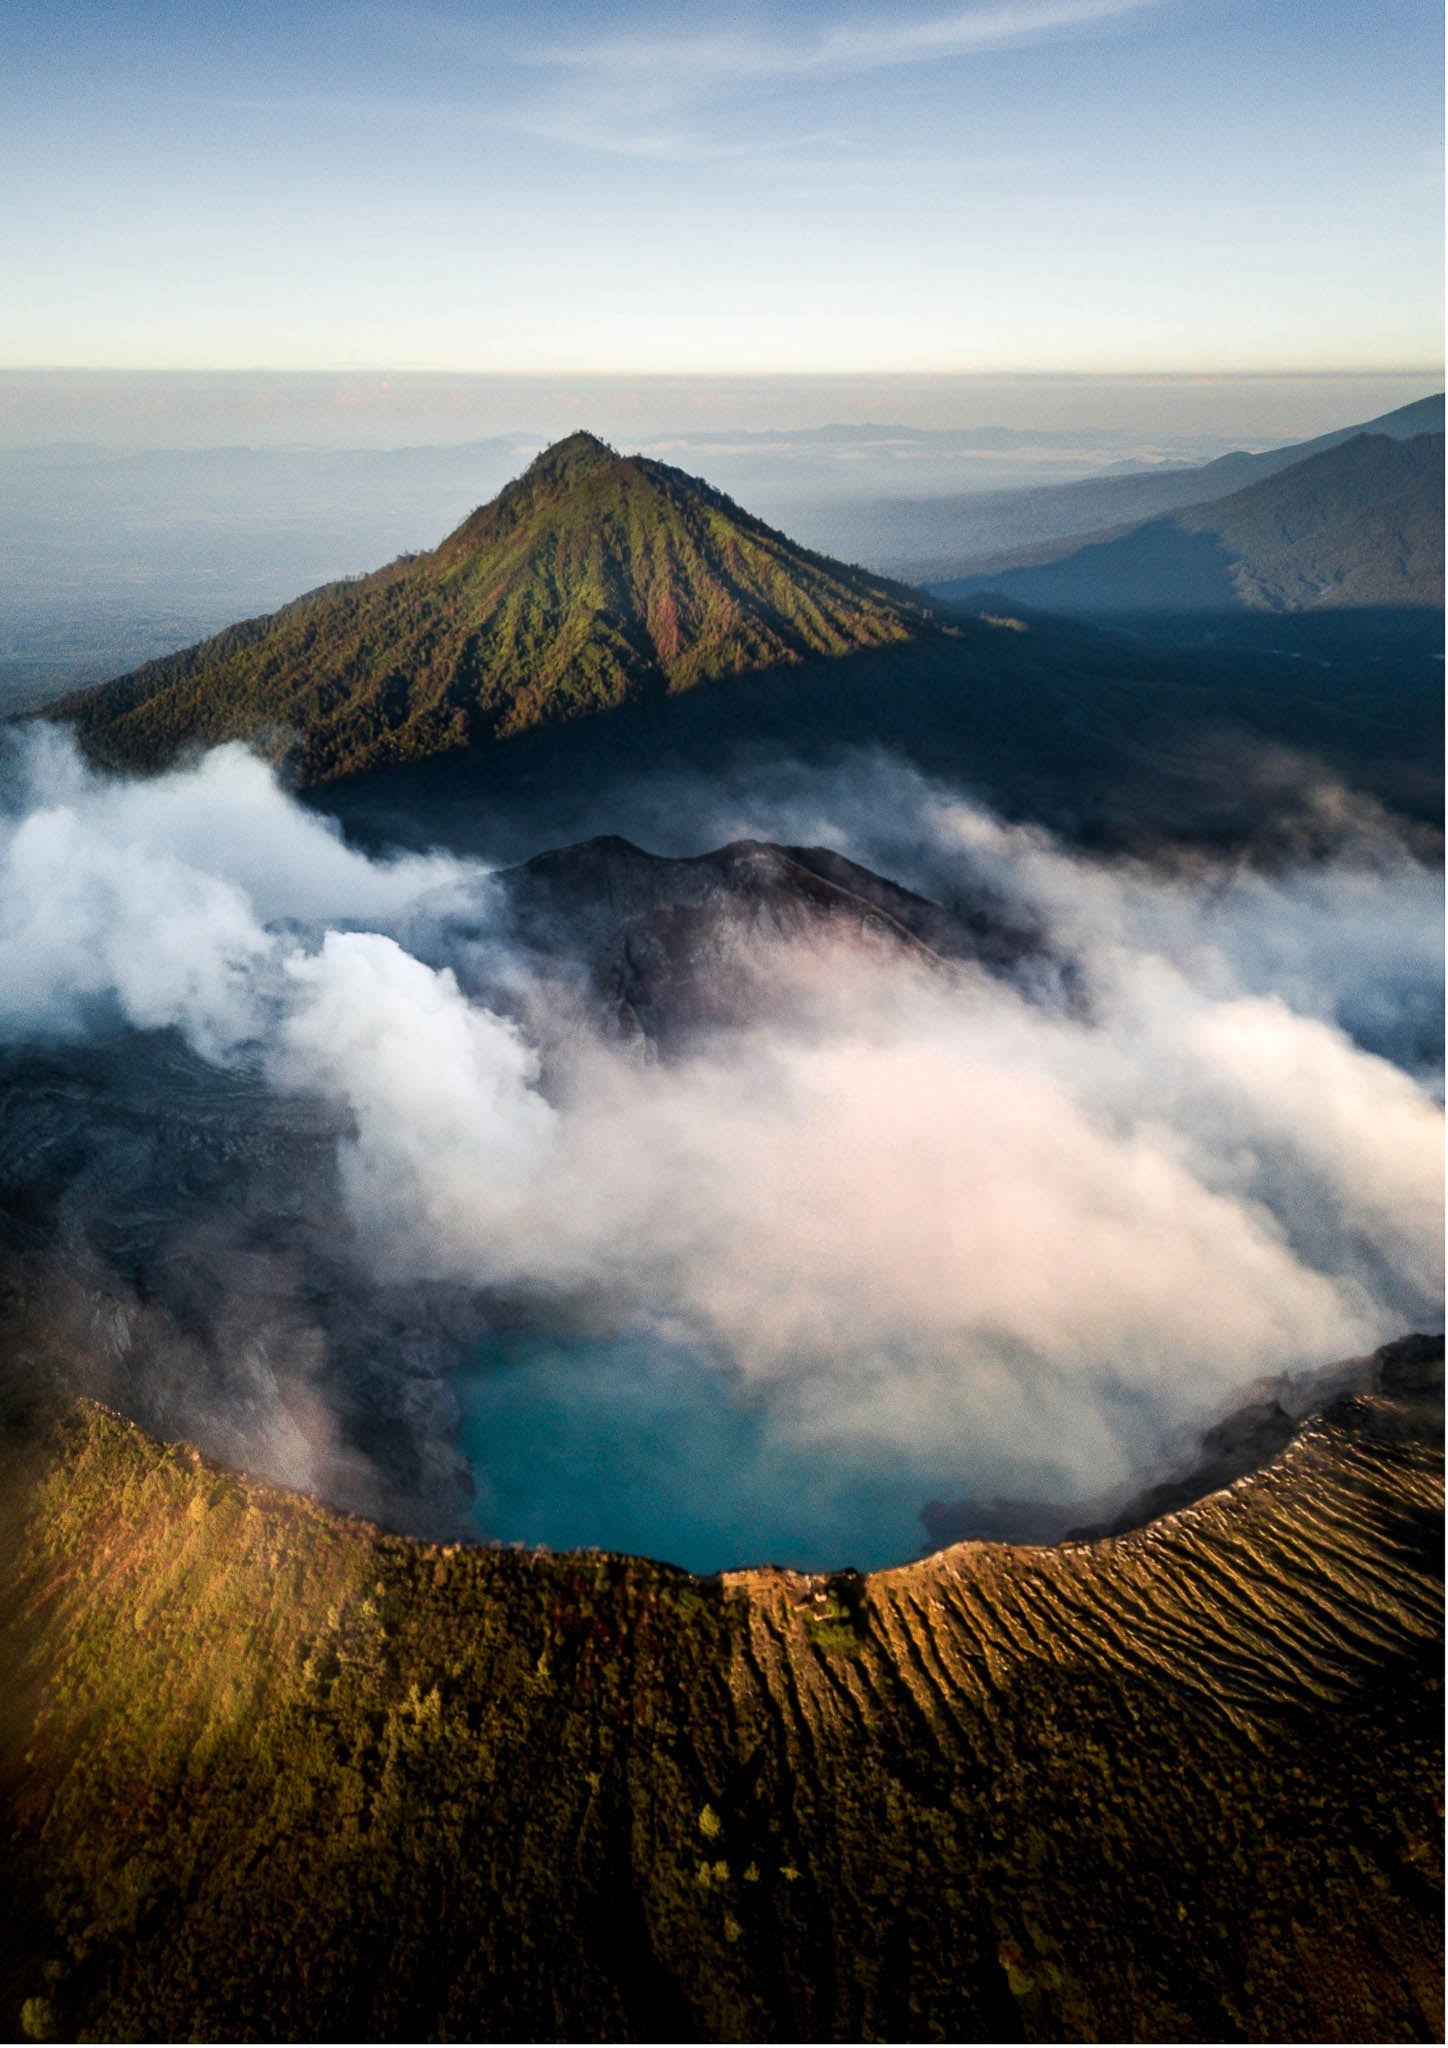 Crater beneath the clouds